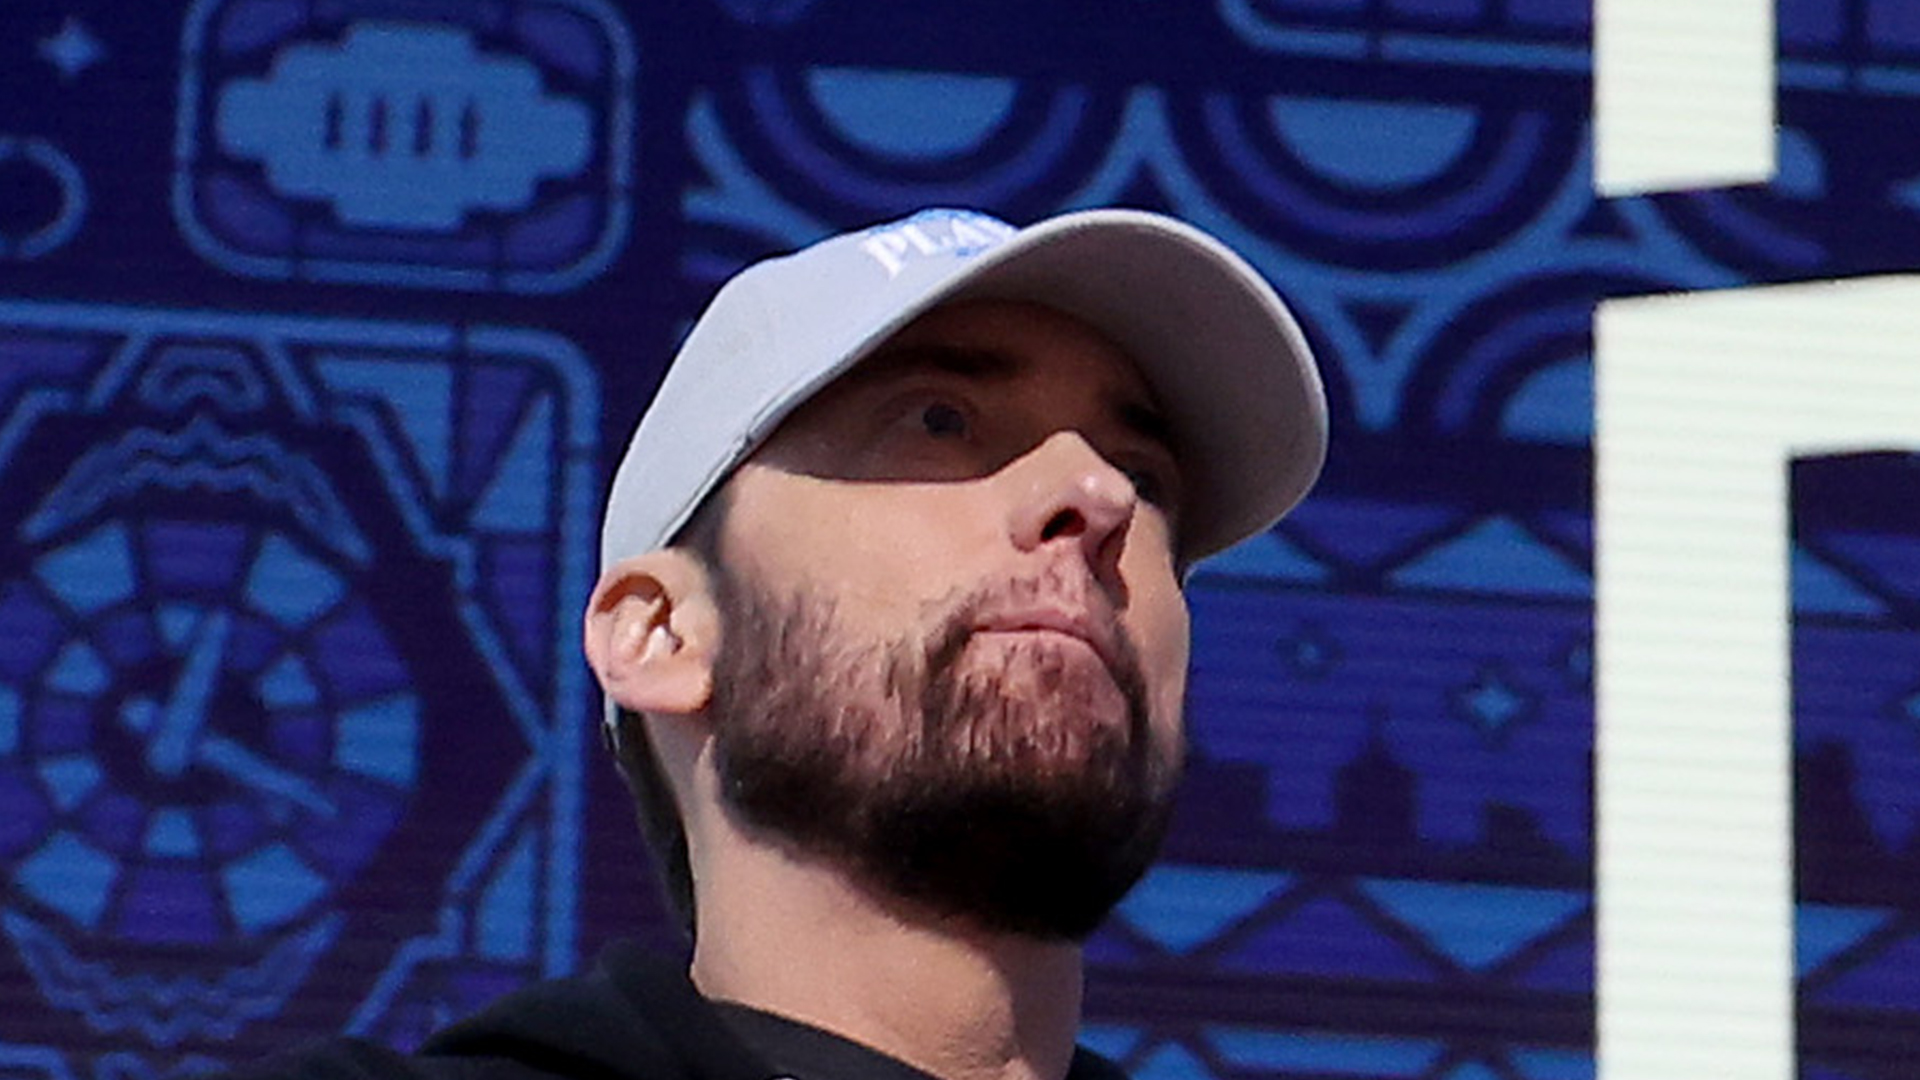 Watch Eminem Rock the NFL Draft with Detroit Lions Stars – Can He Save Roger Goodell?